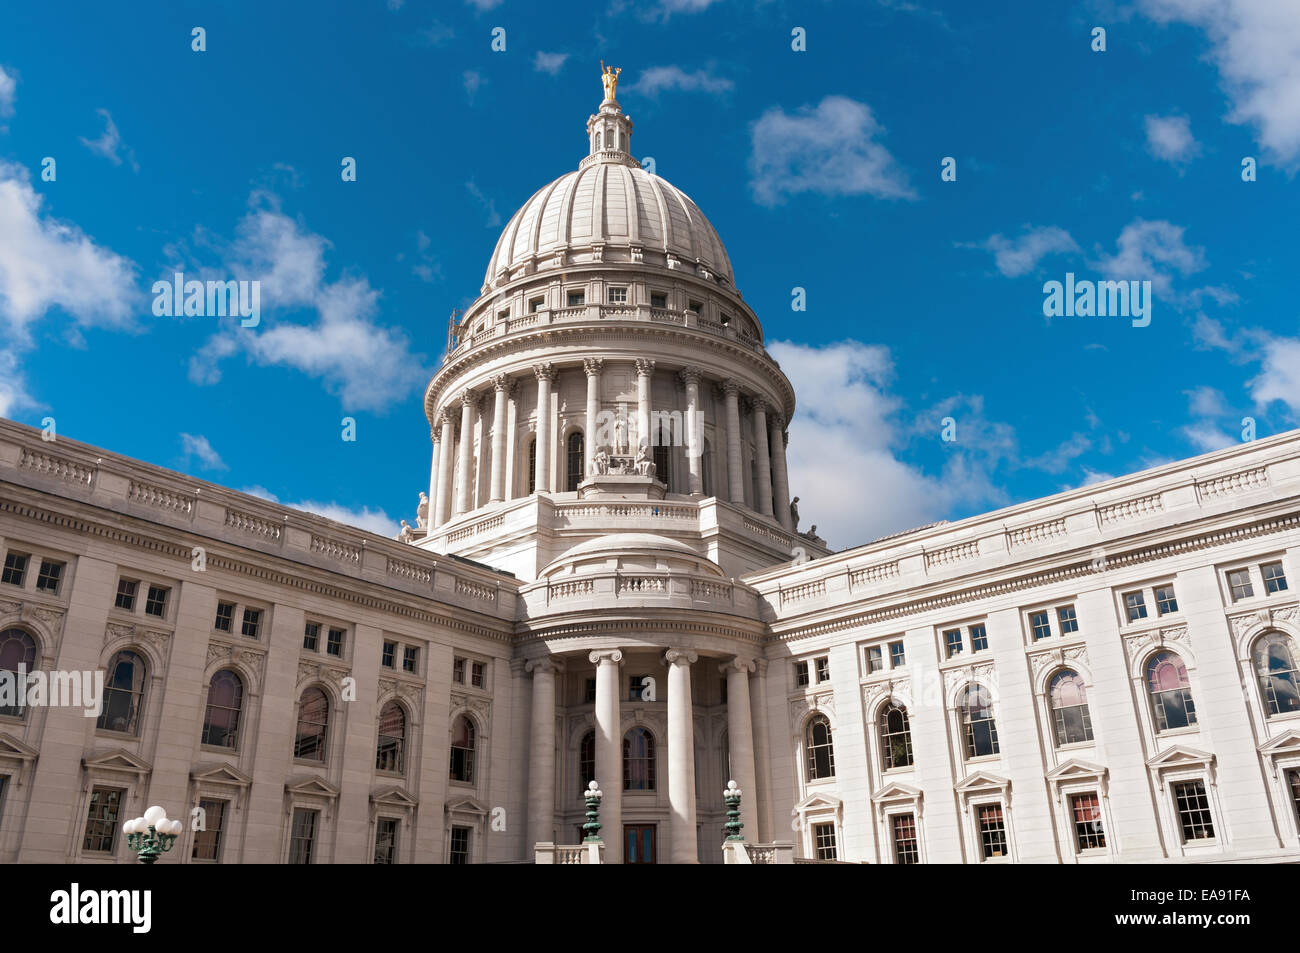 Beaux Arts style architecture of Wisconsin State Capitol and dome under blue skies Stock Photo